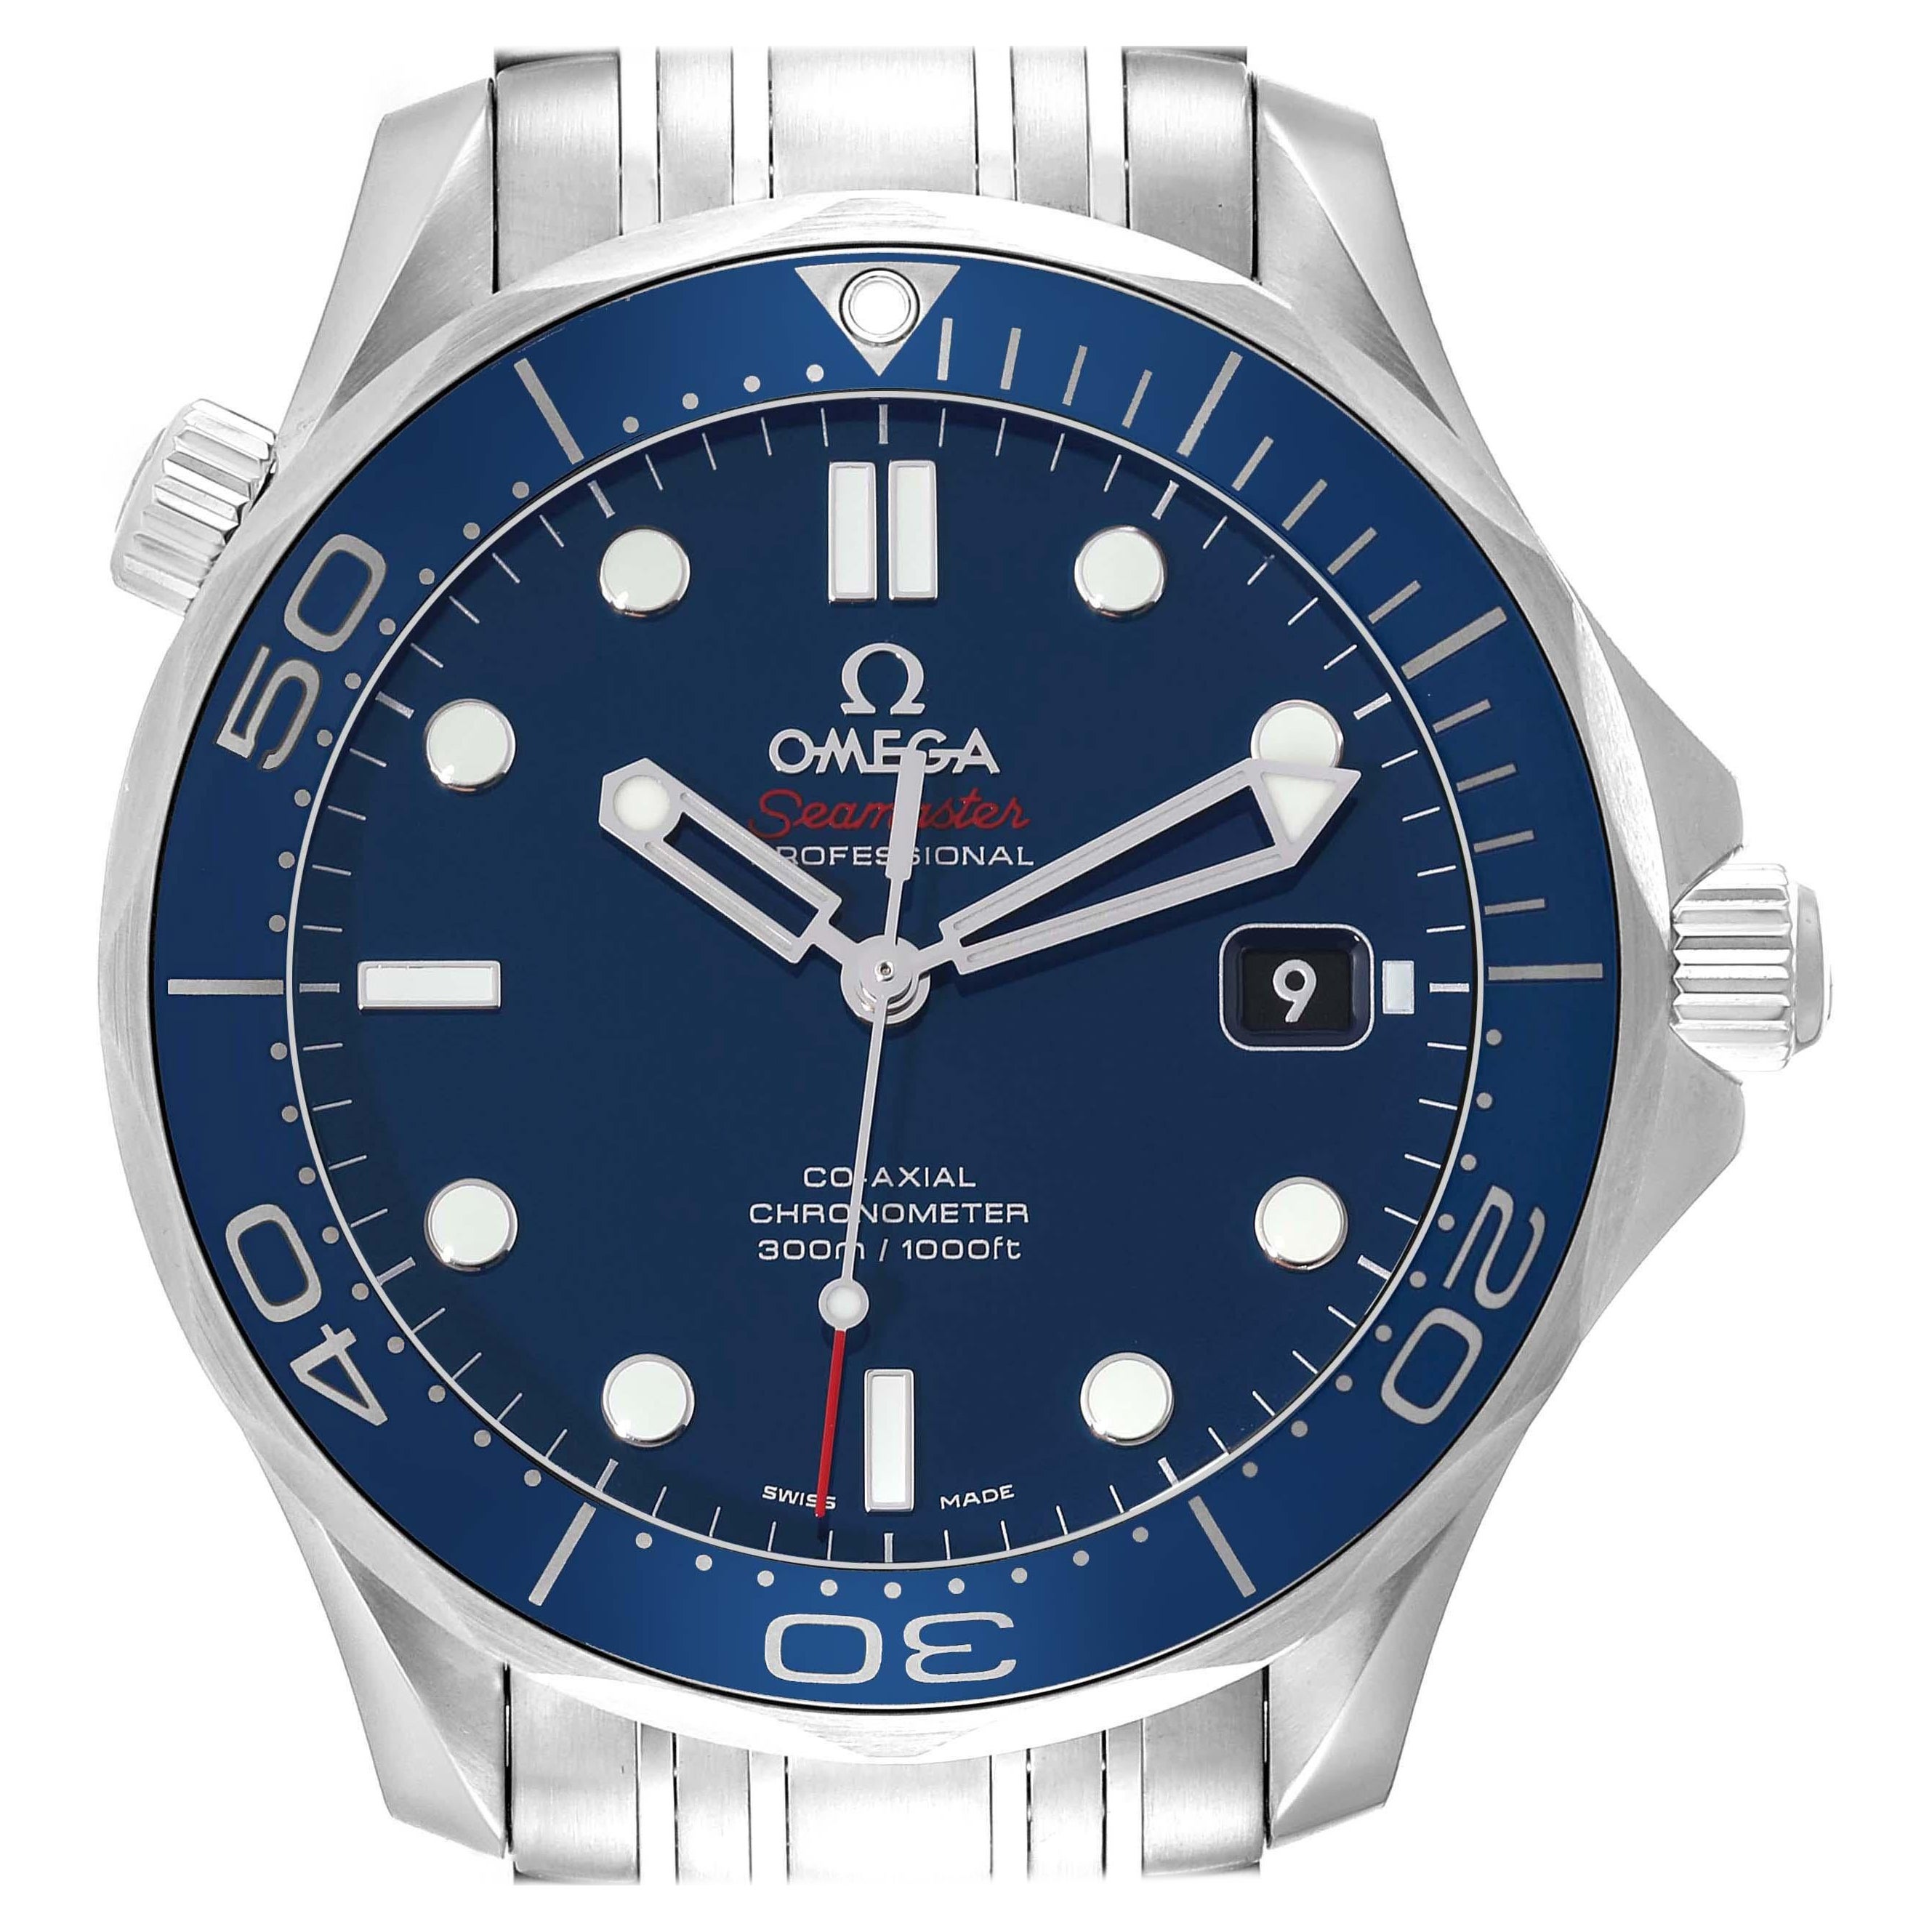 Omega Seamaster Diver 300M Steel Mens Watch 212.30.41.20.03.001 For Sale